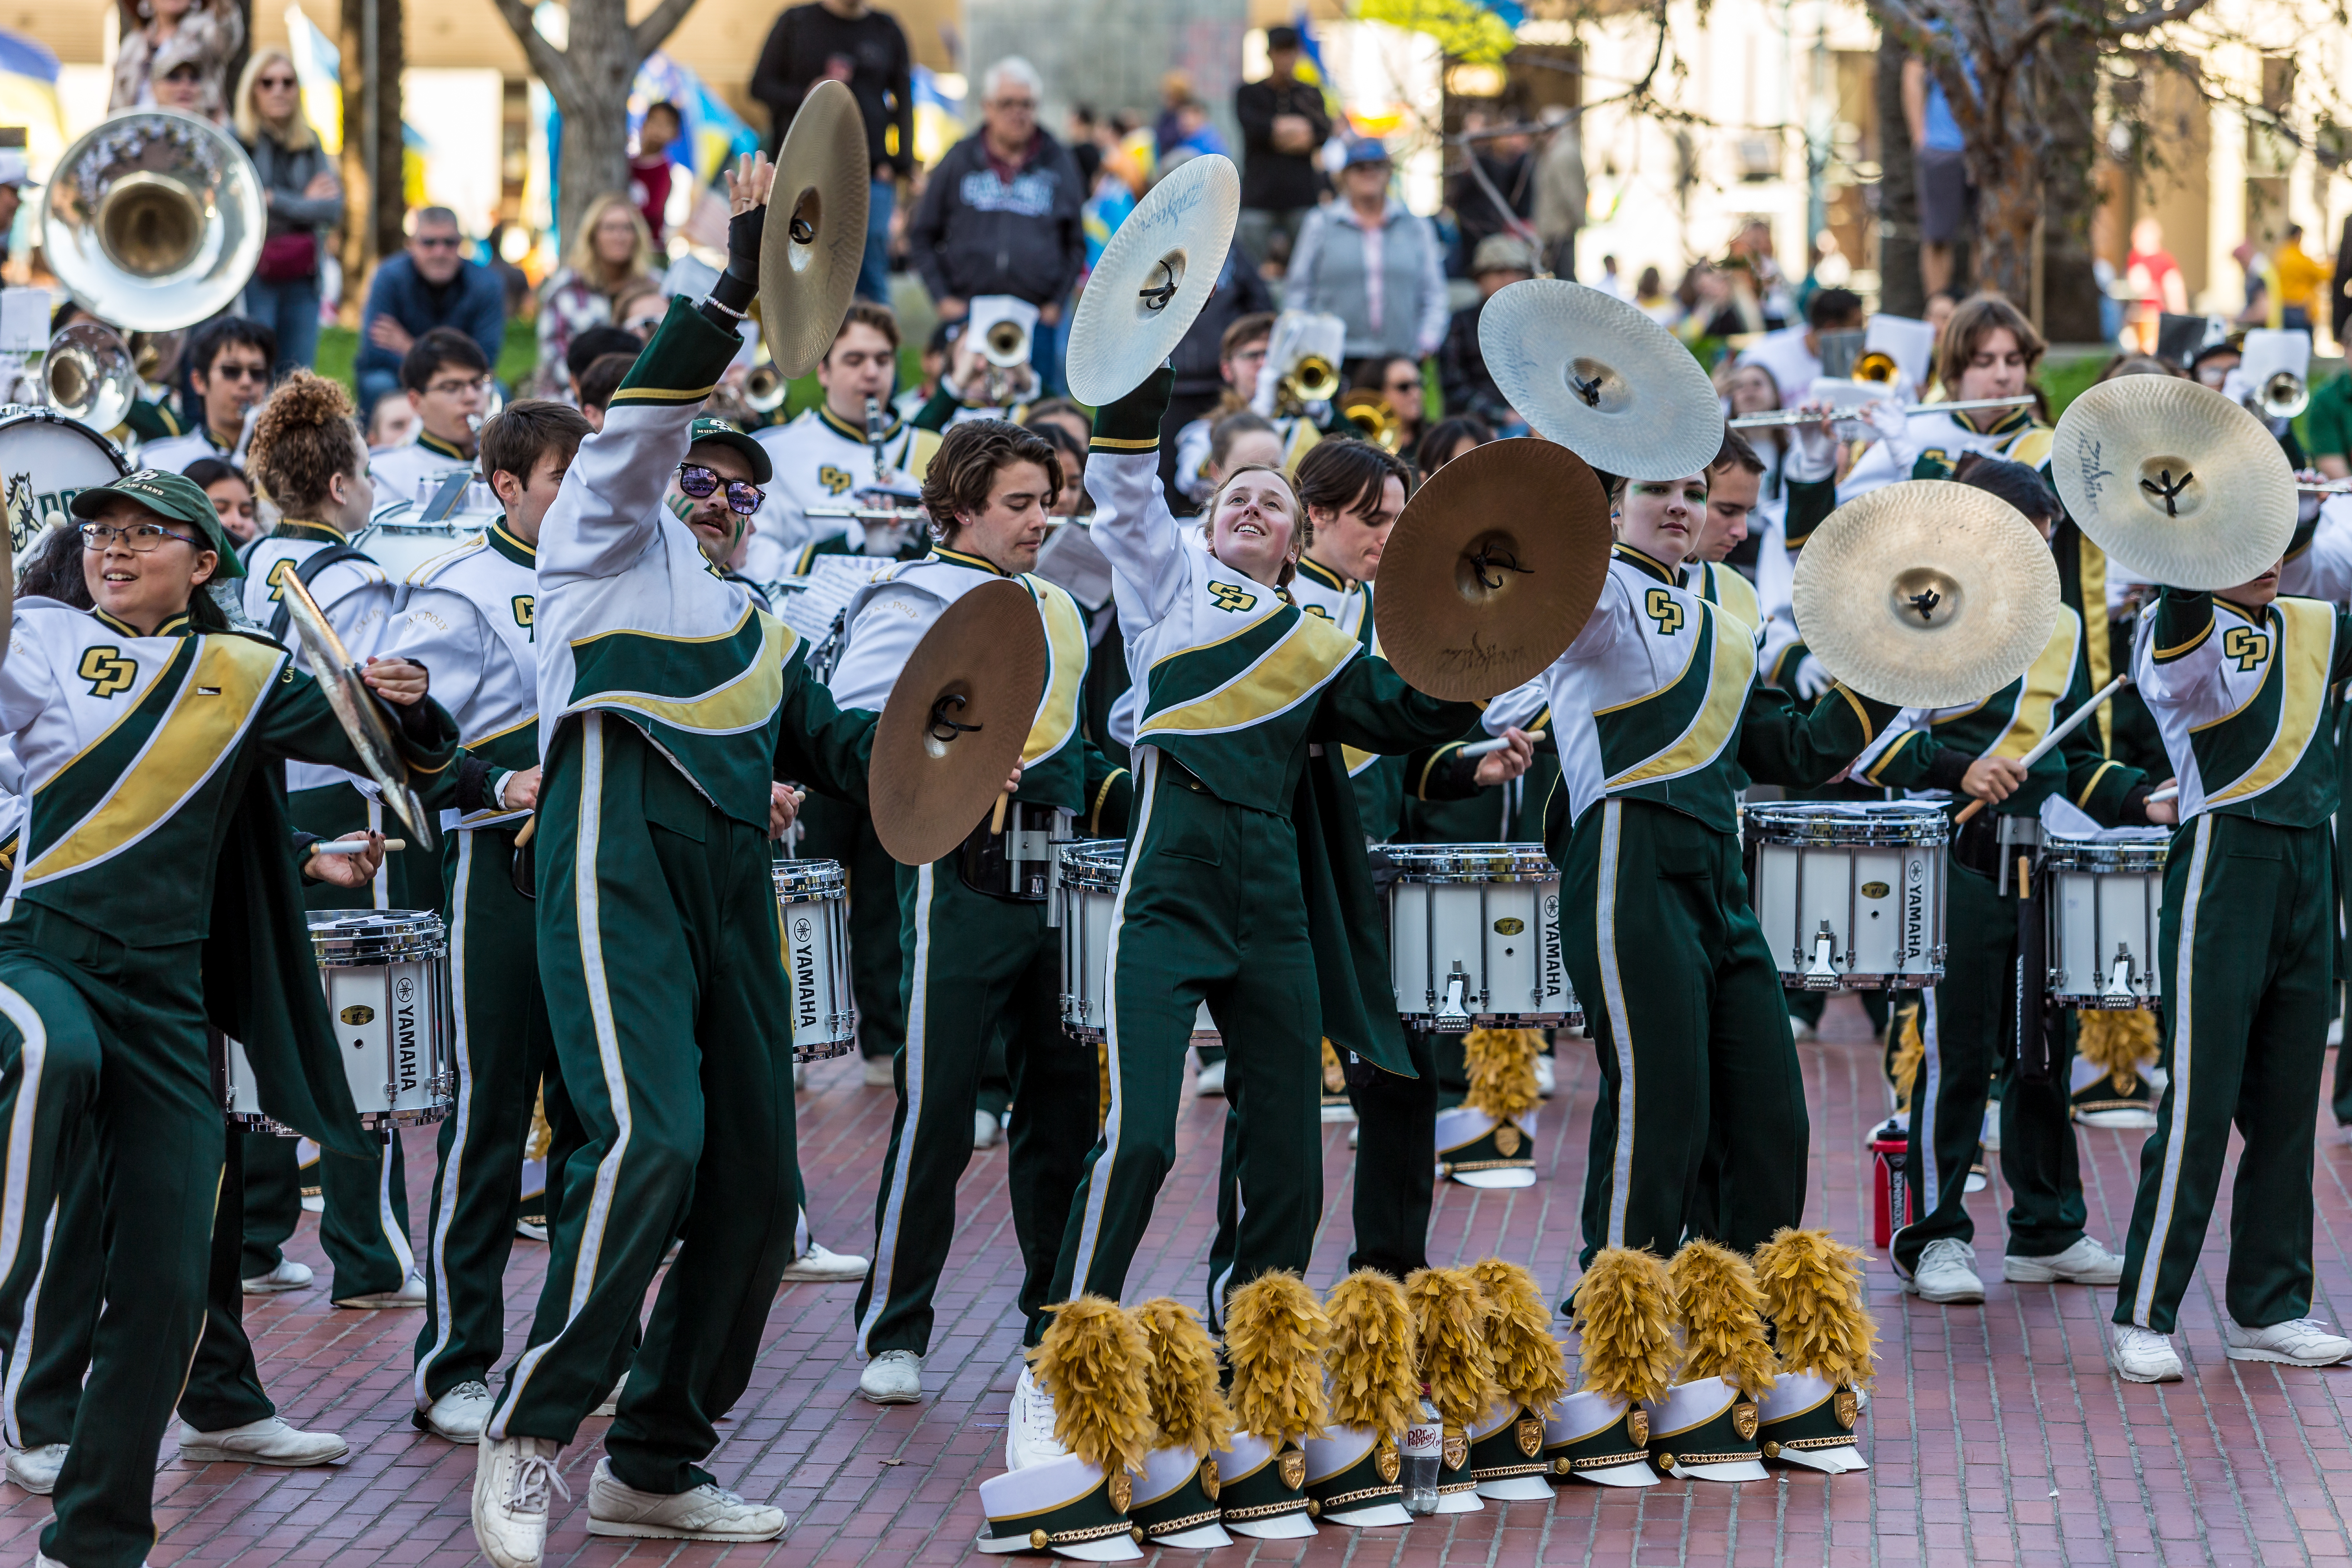 Mustang Band's cymbal players perform in front of the San Francisco Ferry building ahead of the Chinese New Year Parade.